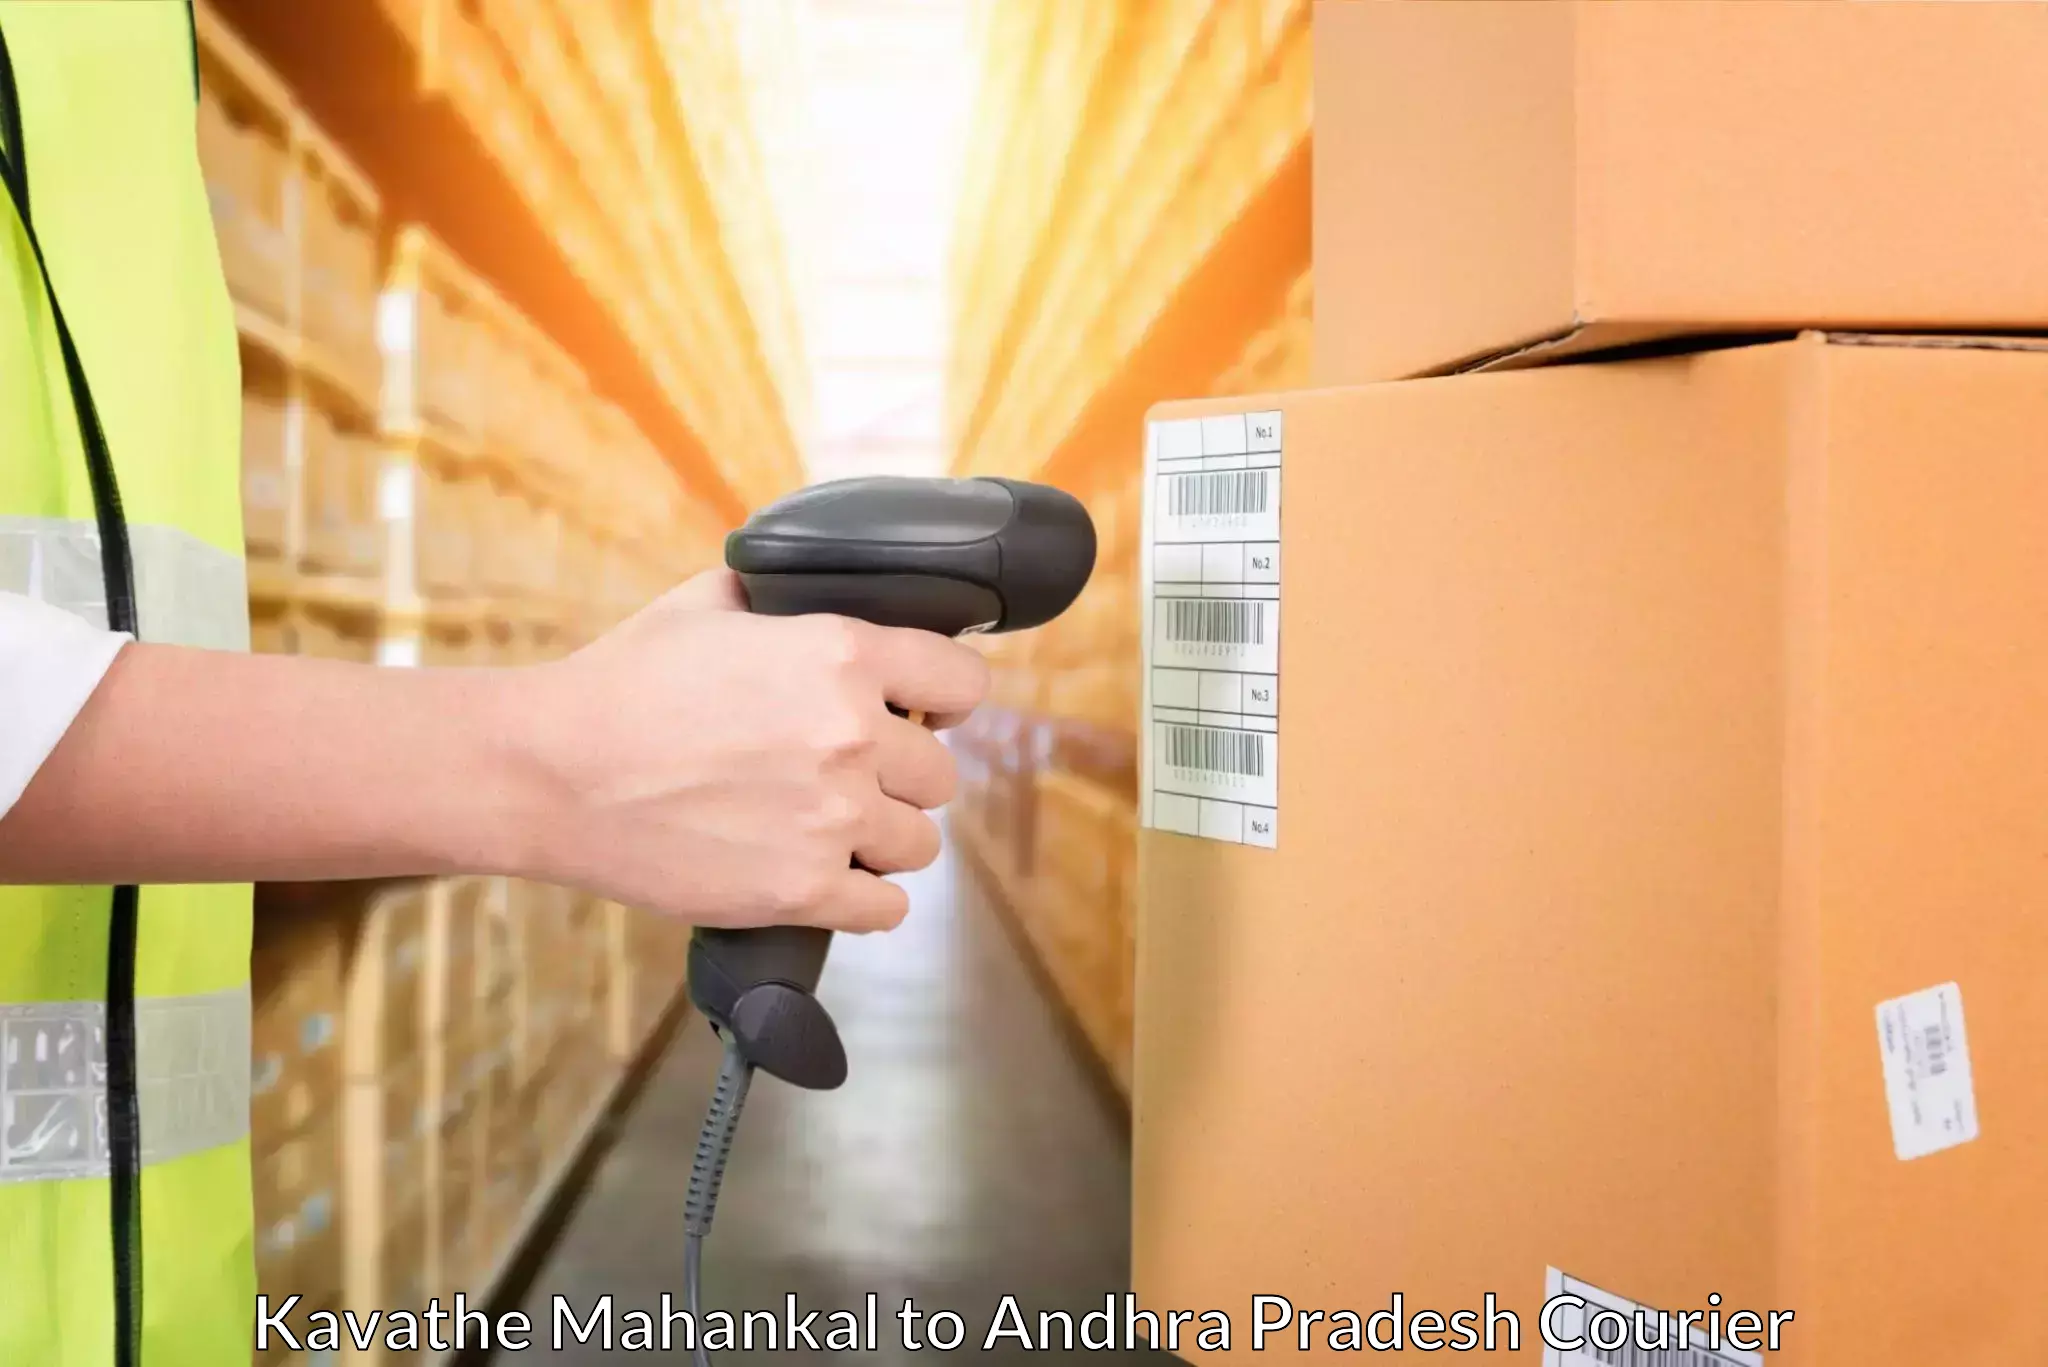 Flexible delivery schedules Kavathe Mahankal to Podalakur